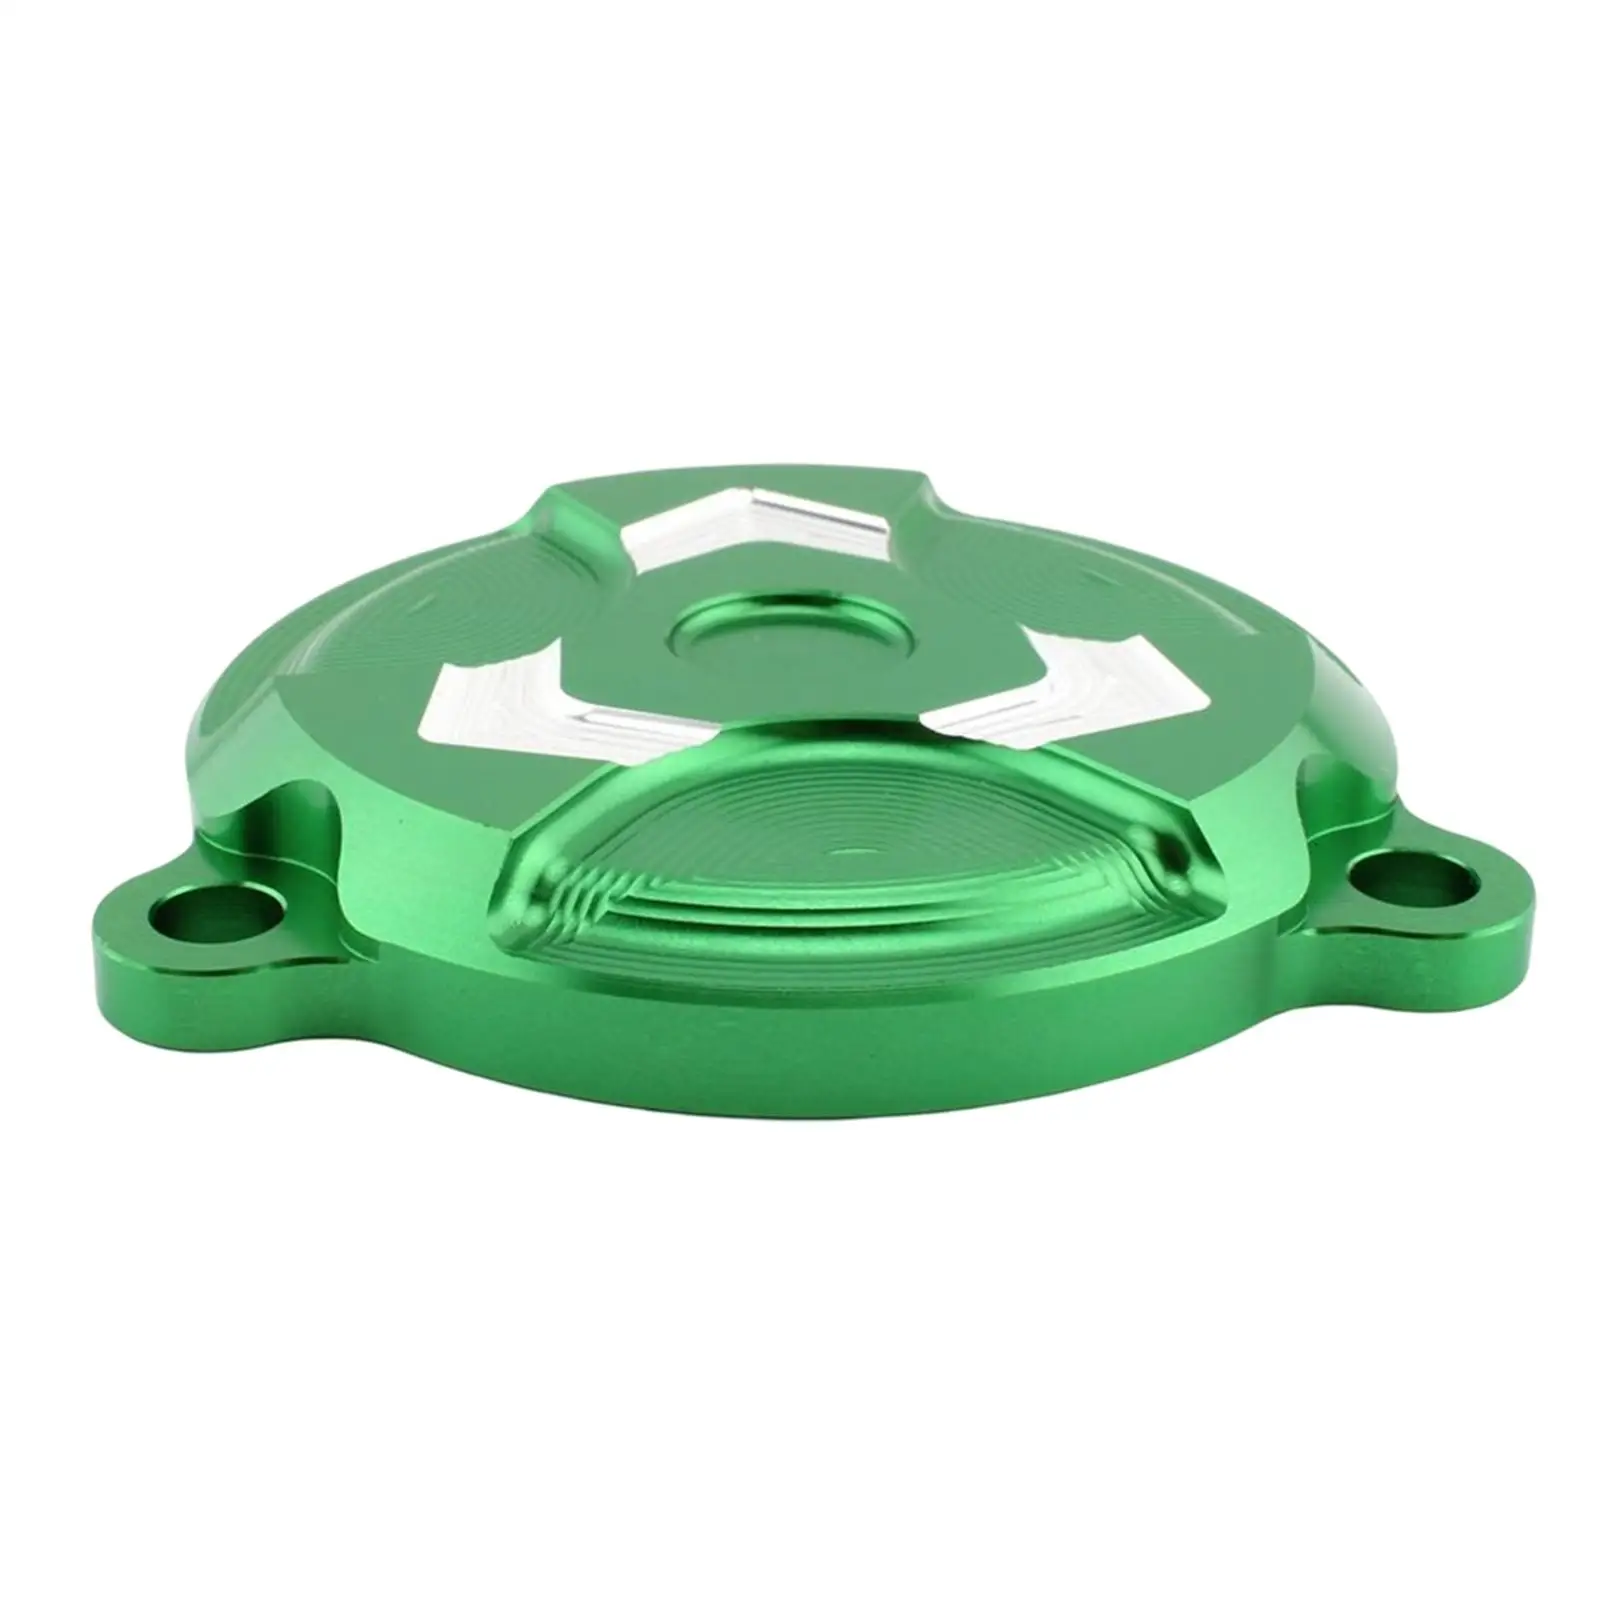  Cover     for Klx125  Klx150BF  Bike Replacement Part Decoration Green